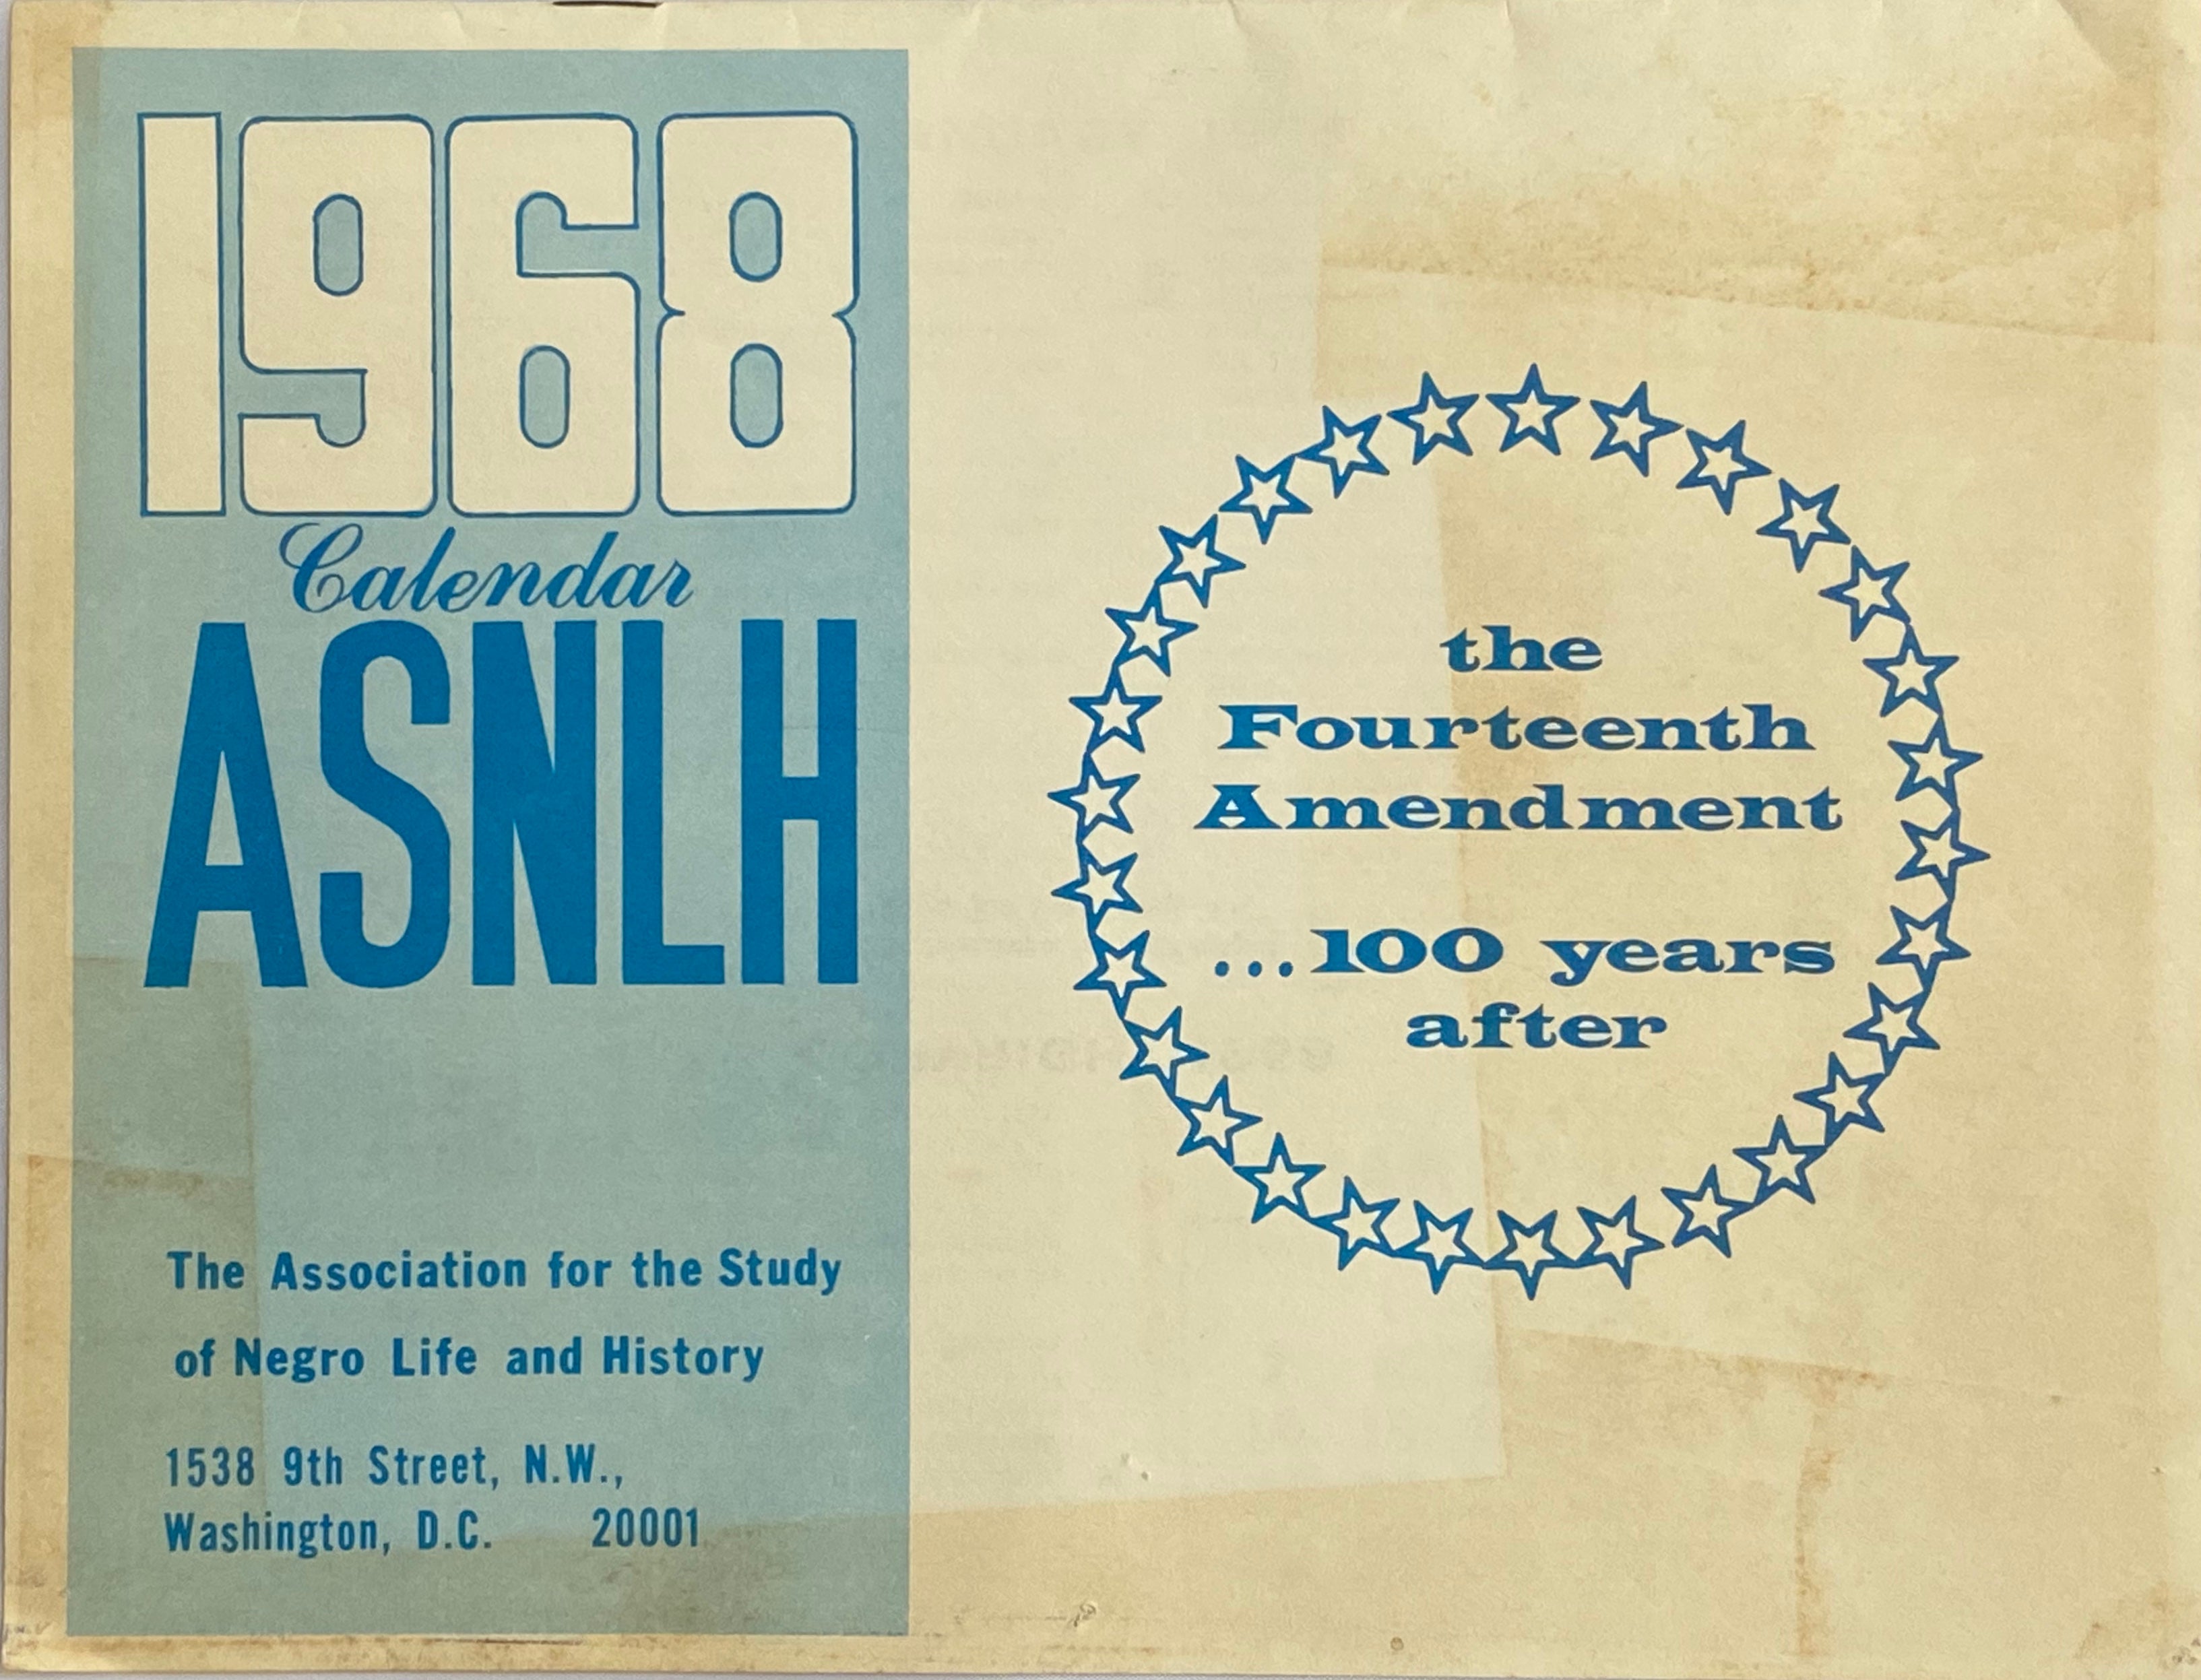 1968 Calendar: The Association for the Study of Negro Life and History